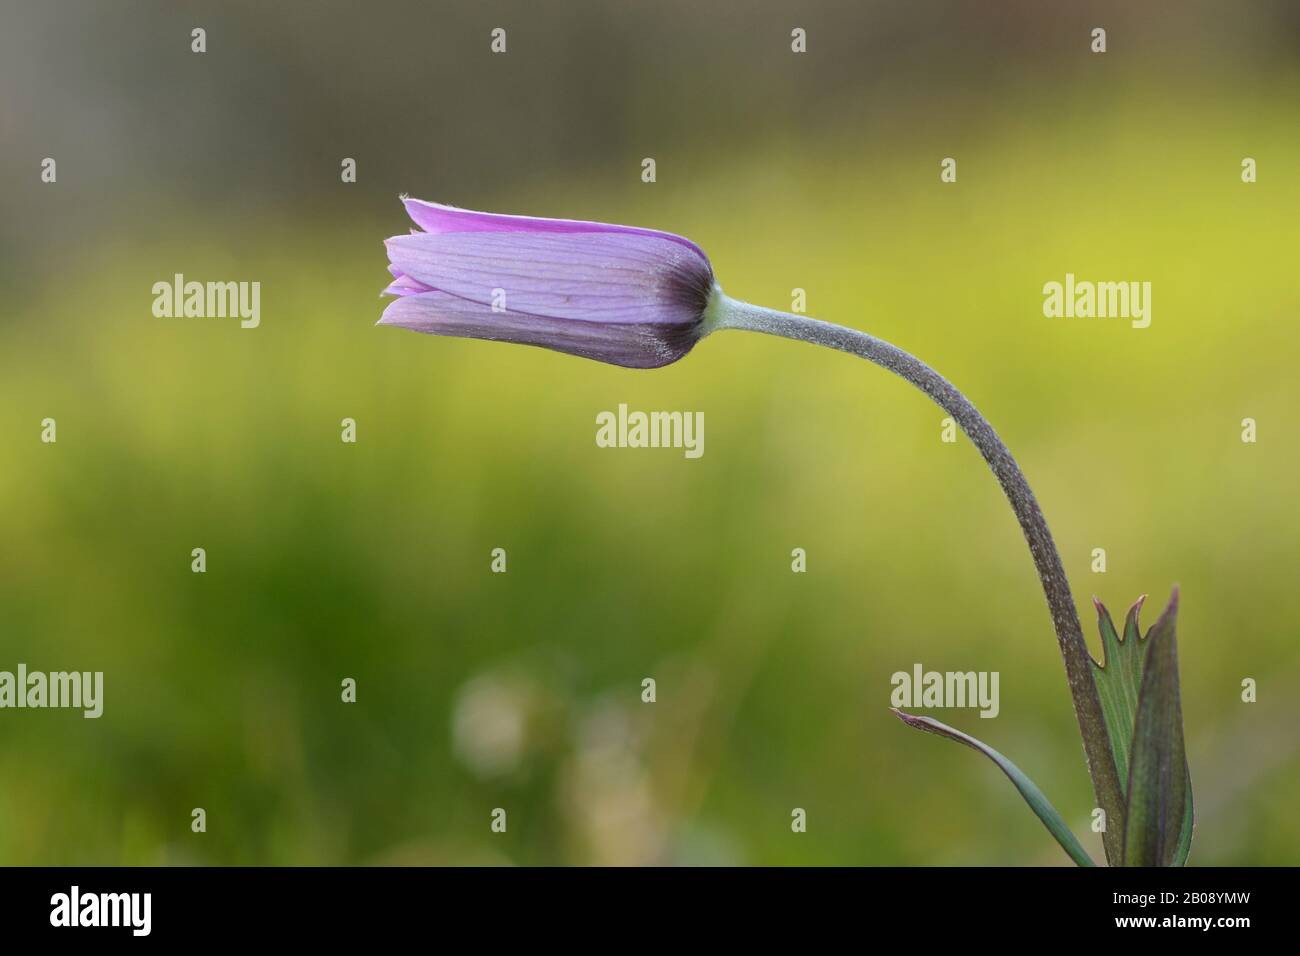 Close-up of purple anemone hortensis flower in bloom, against the yellow field background Stock Photo